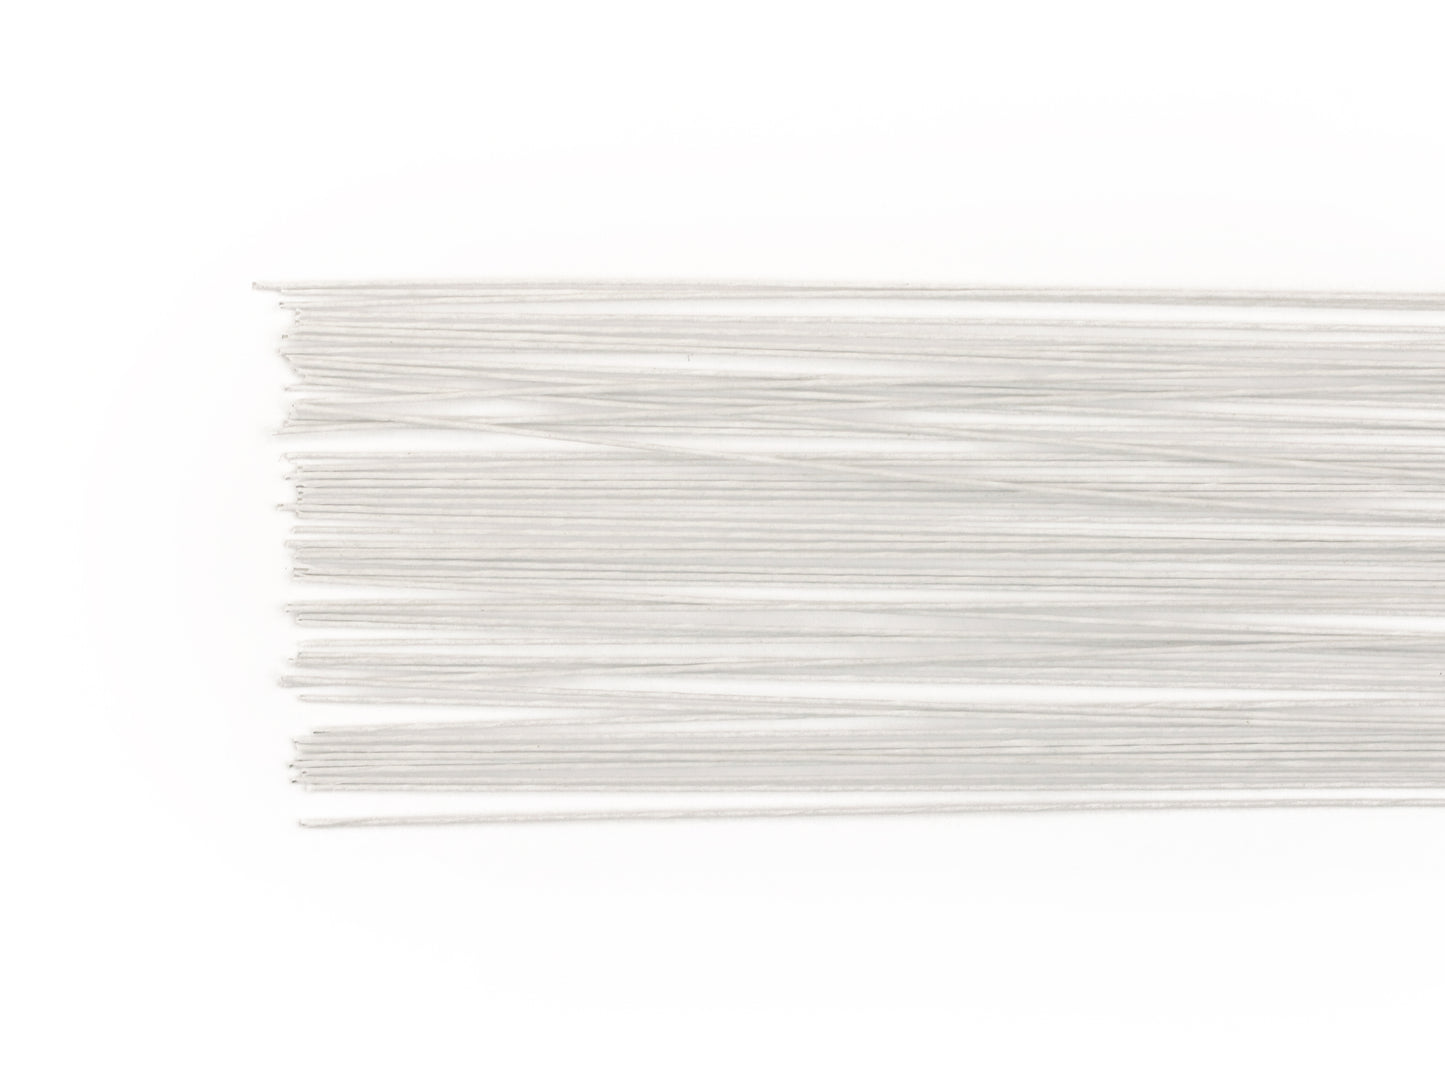 White Paper Covered Steel Wire Packs - Various Gauges #22, #26, #32 - The Makerss